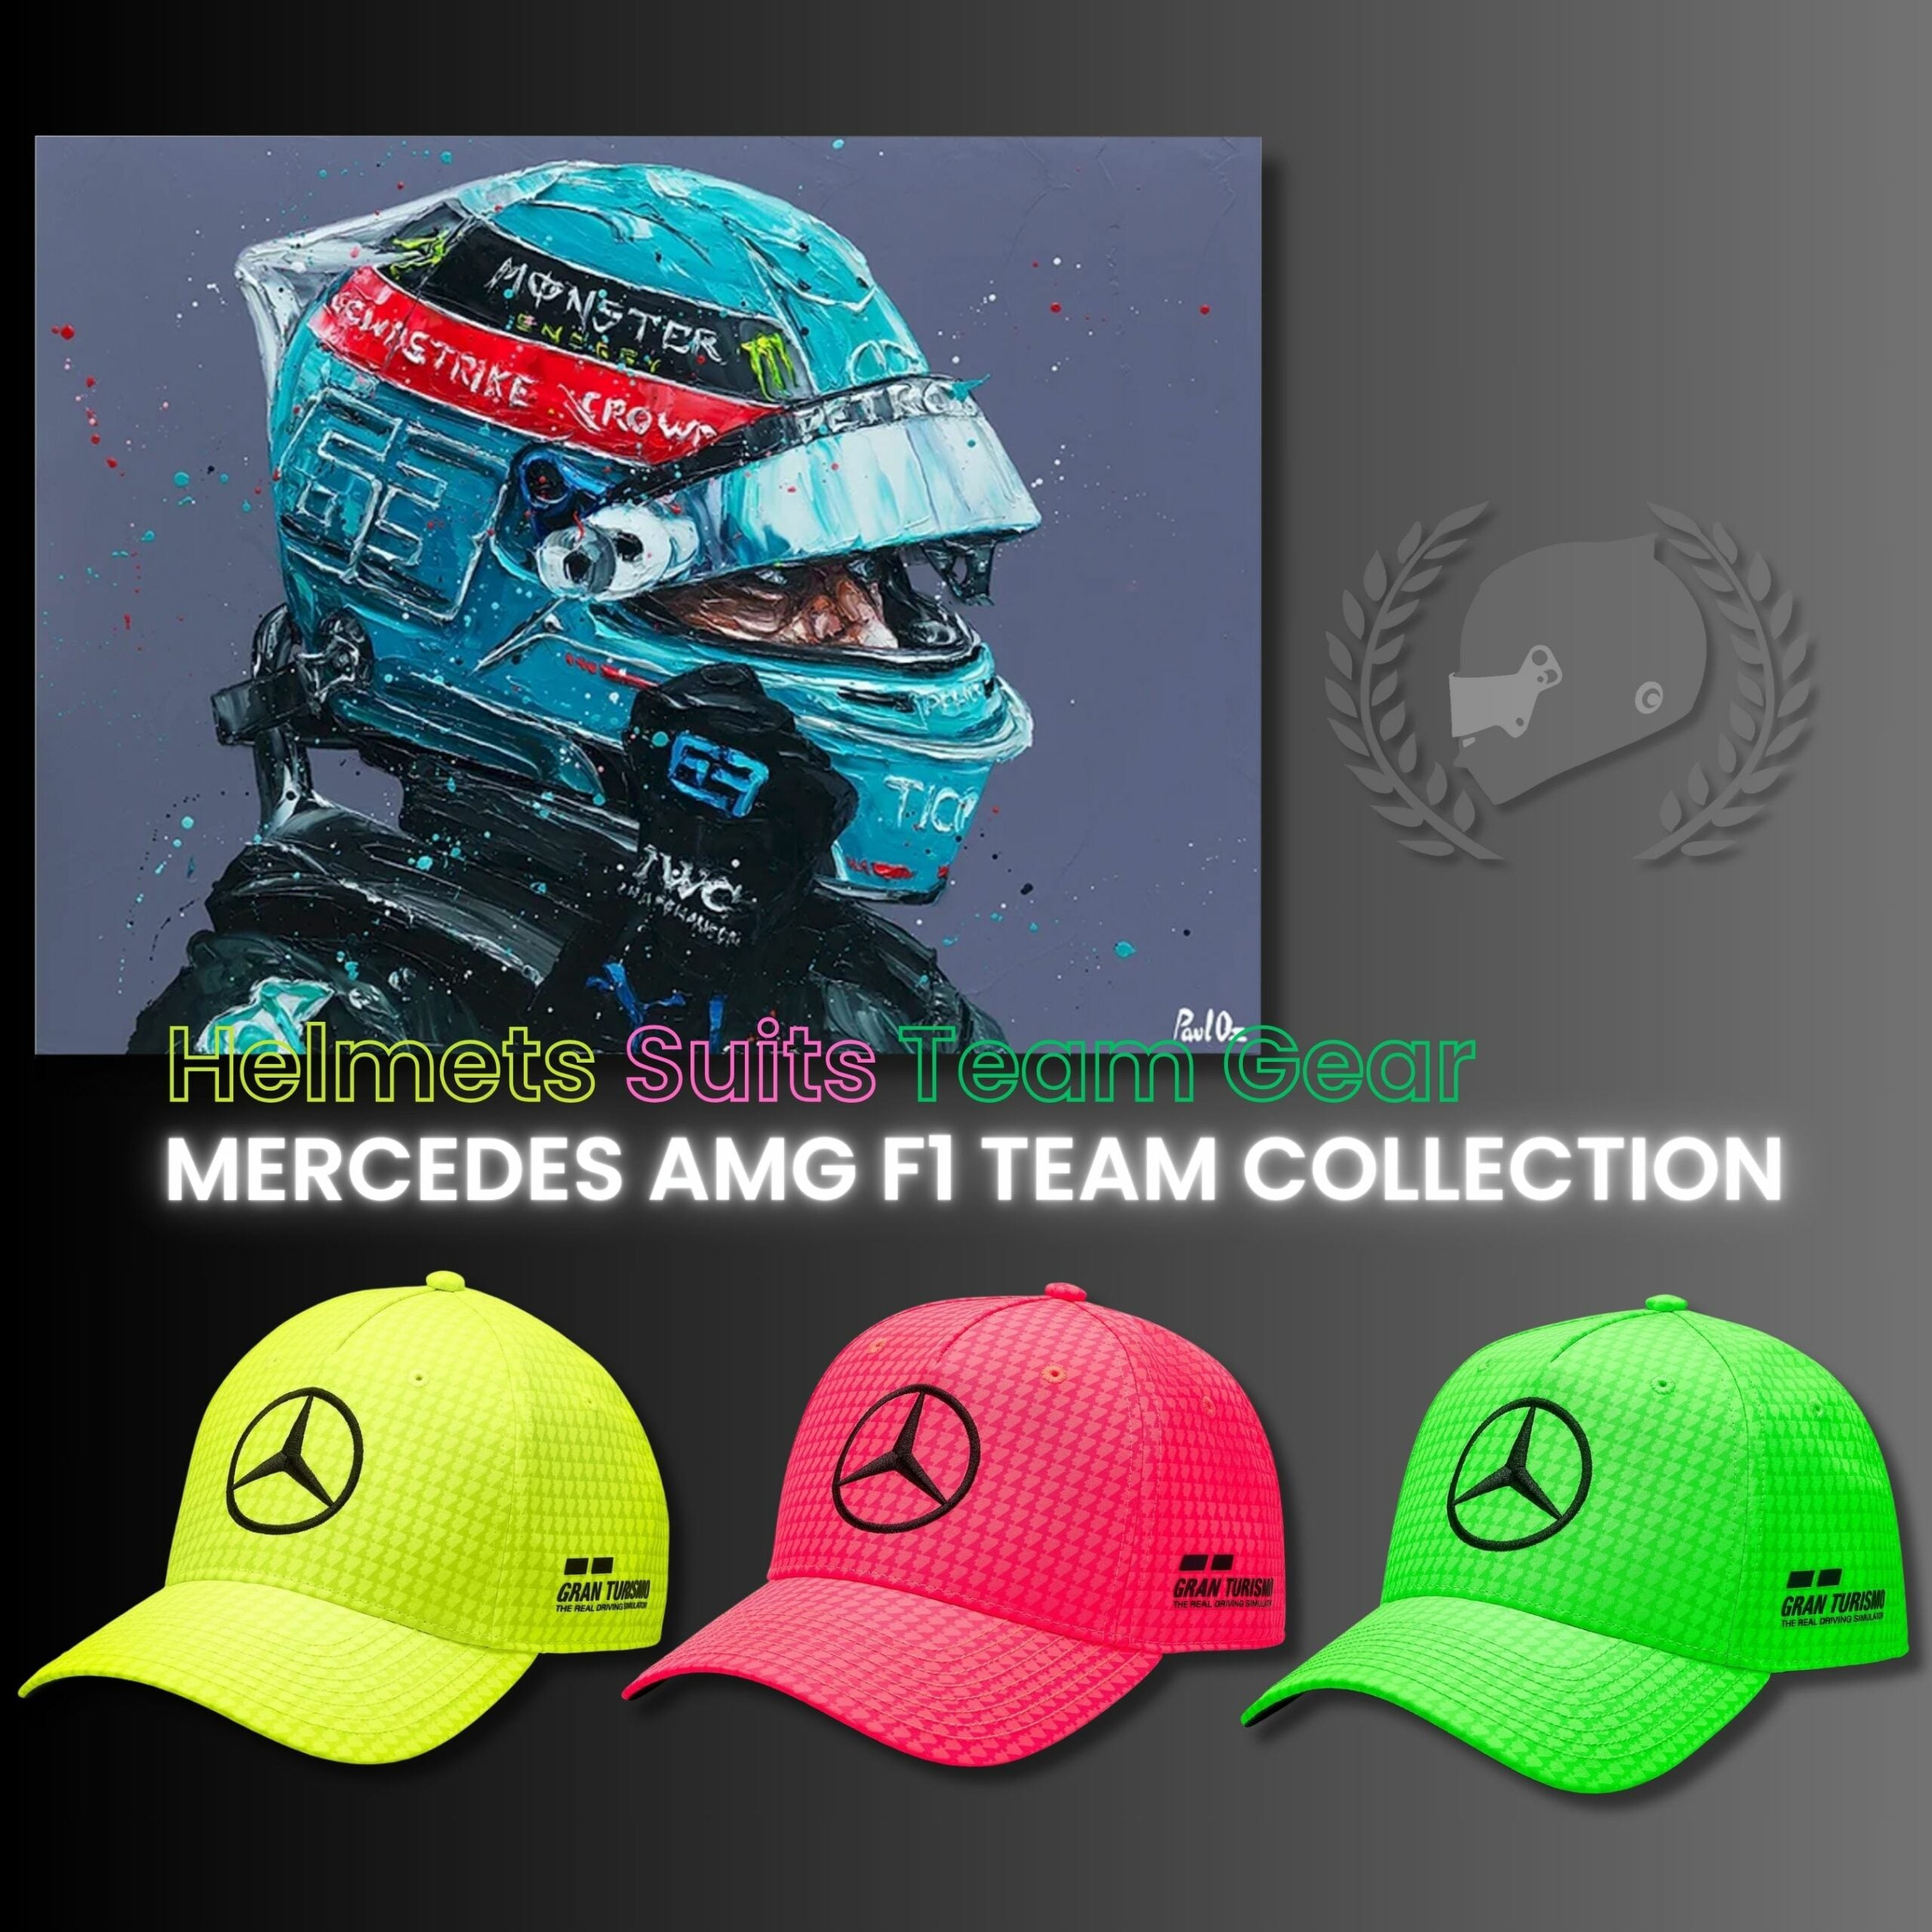 Mercedes Release is now live?